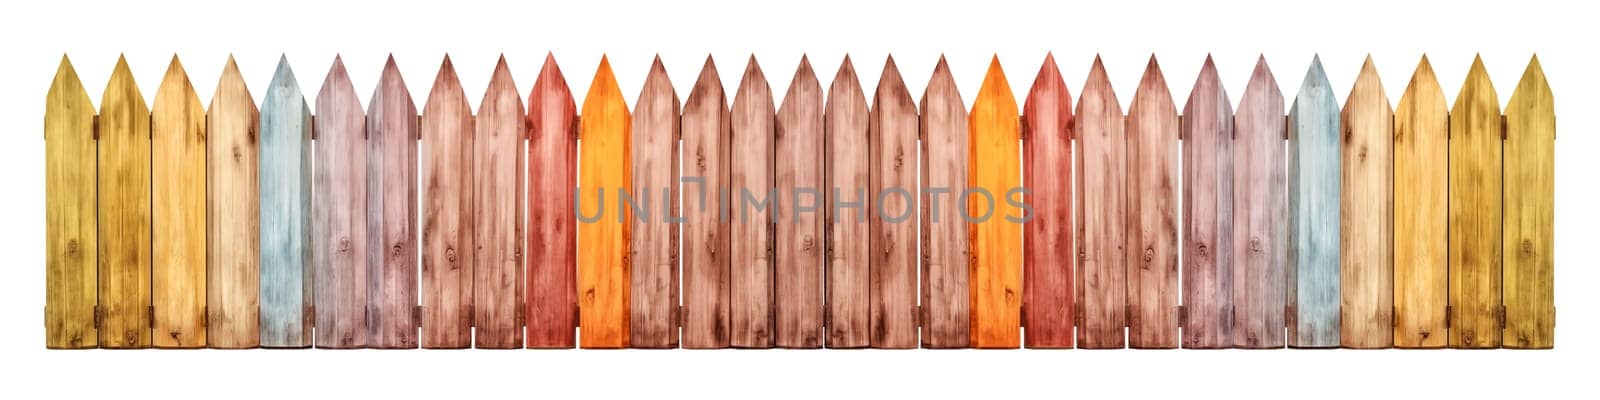 A set of various wooden fences on a transparent background, featuring long strips of wooden fences painted in different colors. The fencing is designed in a style reminiscent of a kindergarten. by SERSOL